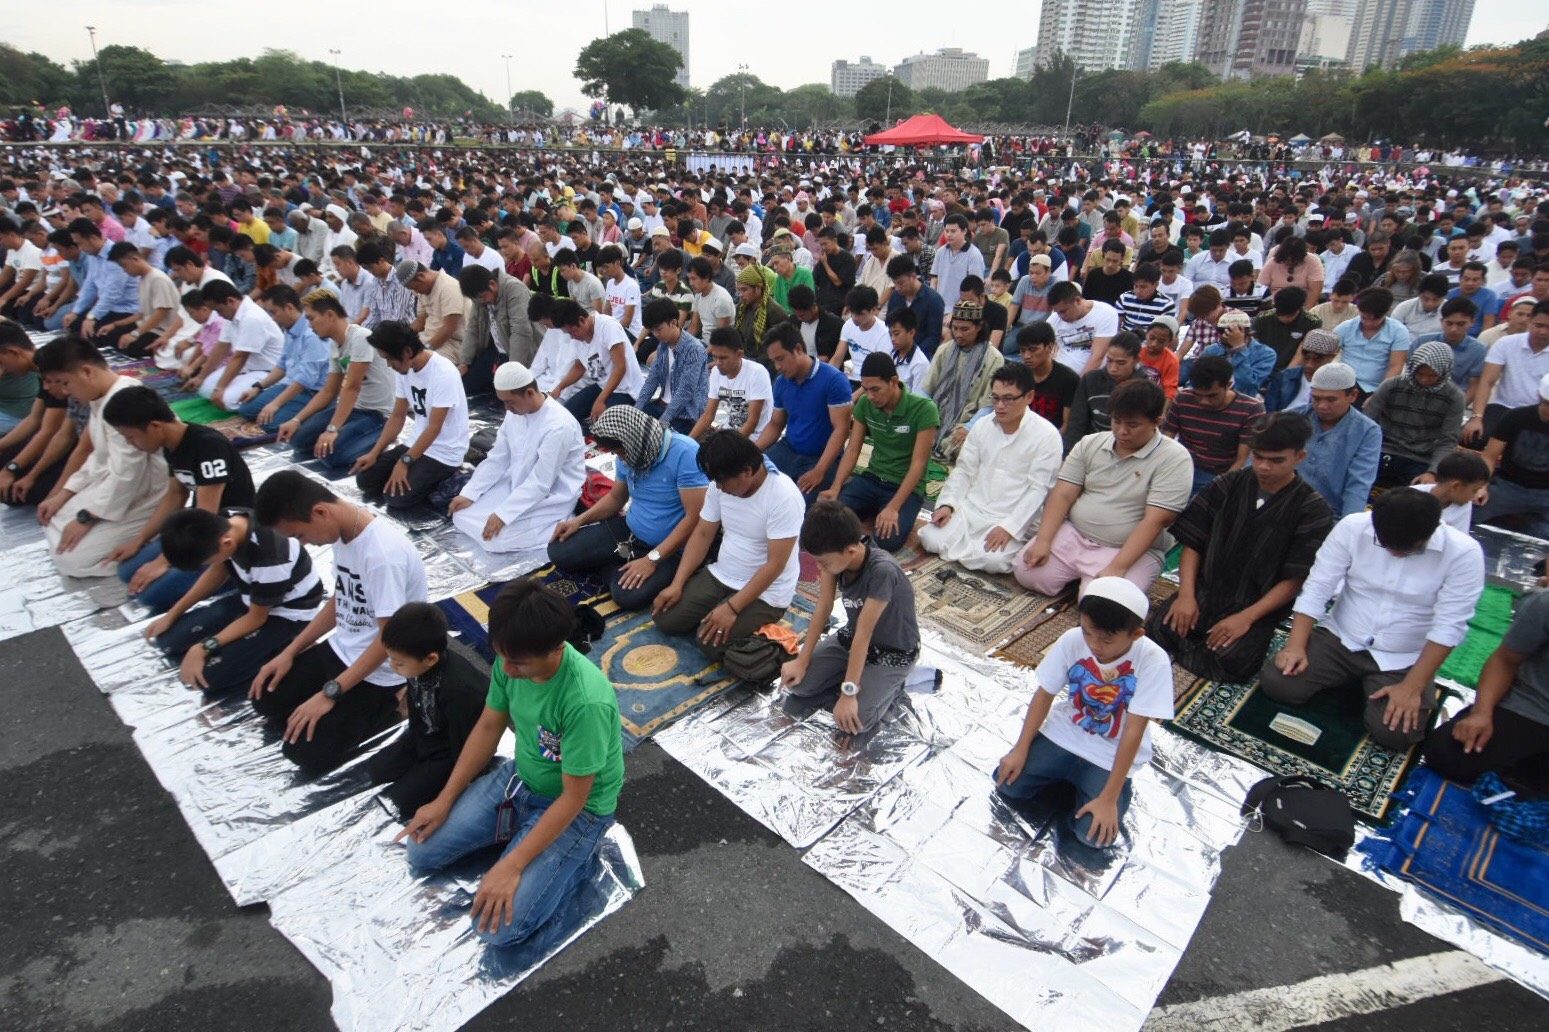 IN PRAYER. Muslims gather at the Quirino Grandstand to mark the end of the holy Islamic month of Ramadan. Photos by Angie de Silva/Rappler 